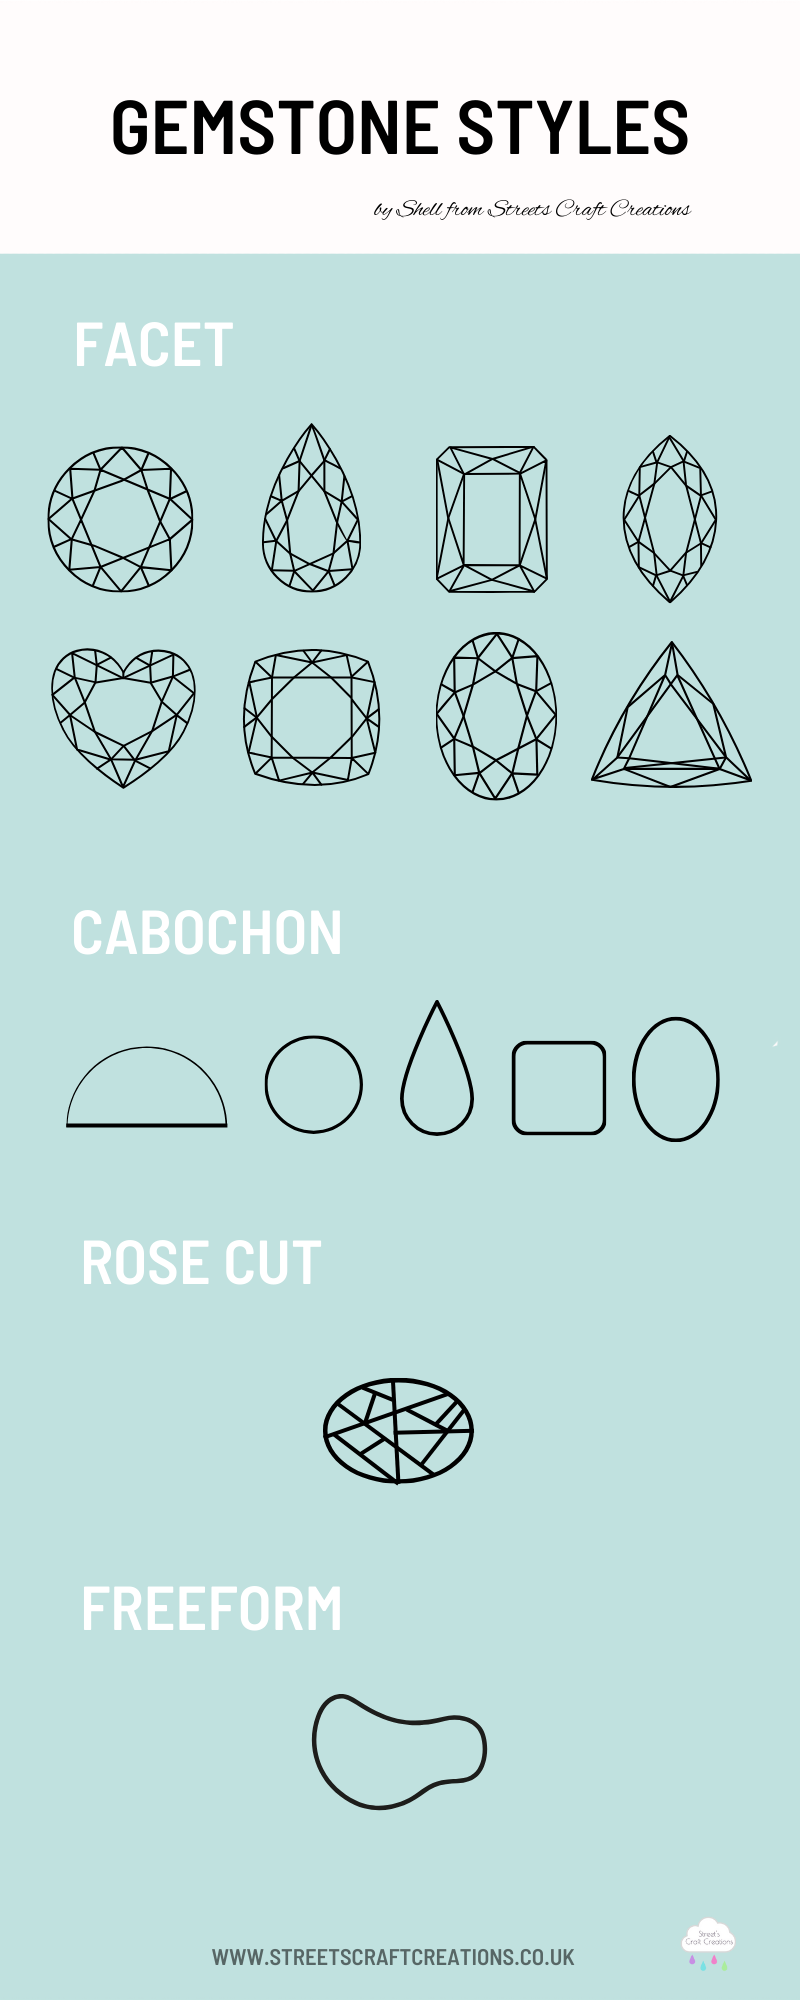 An image of graphics showing the different gemstone styles and cuts